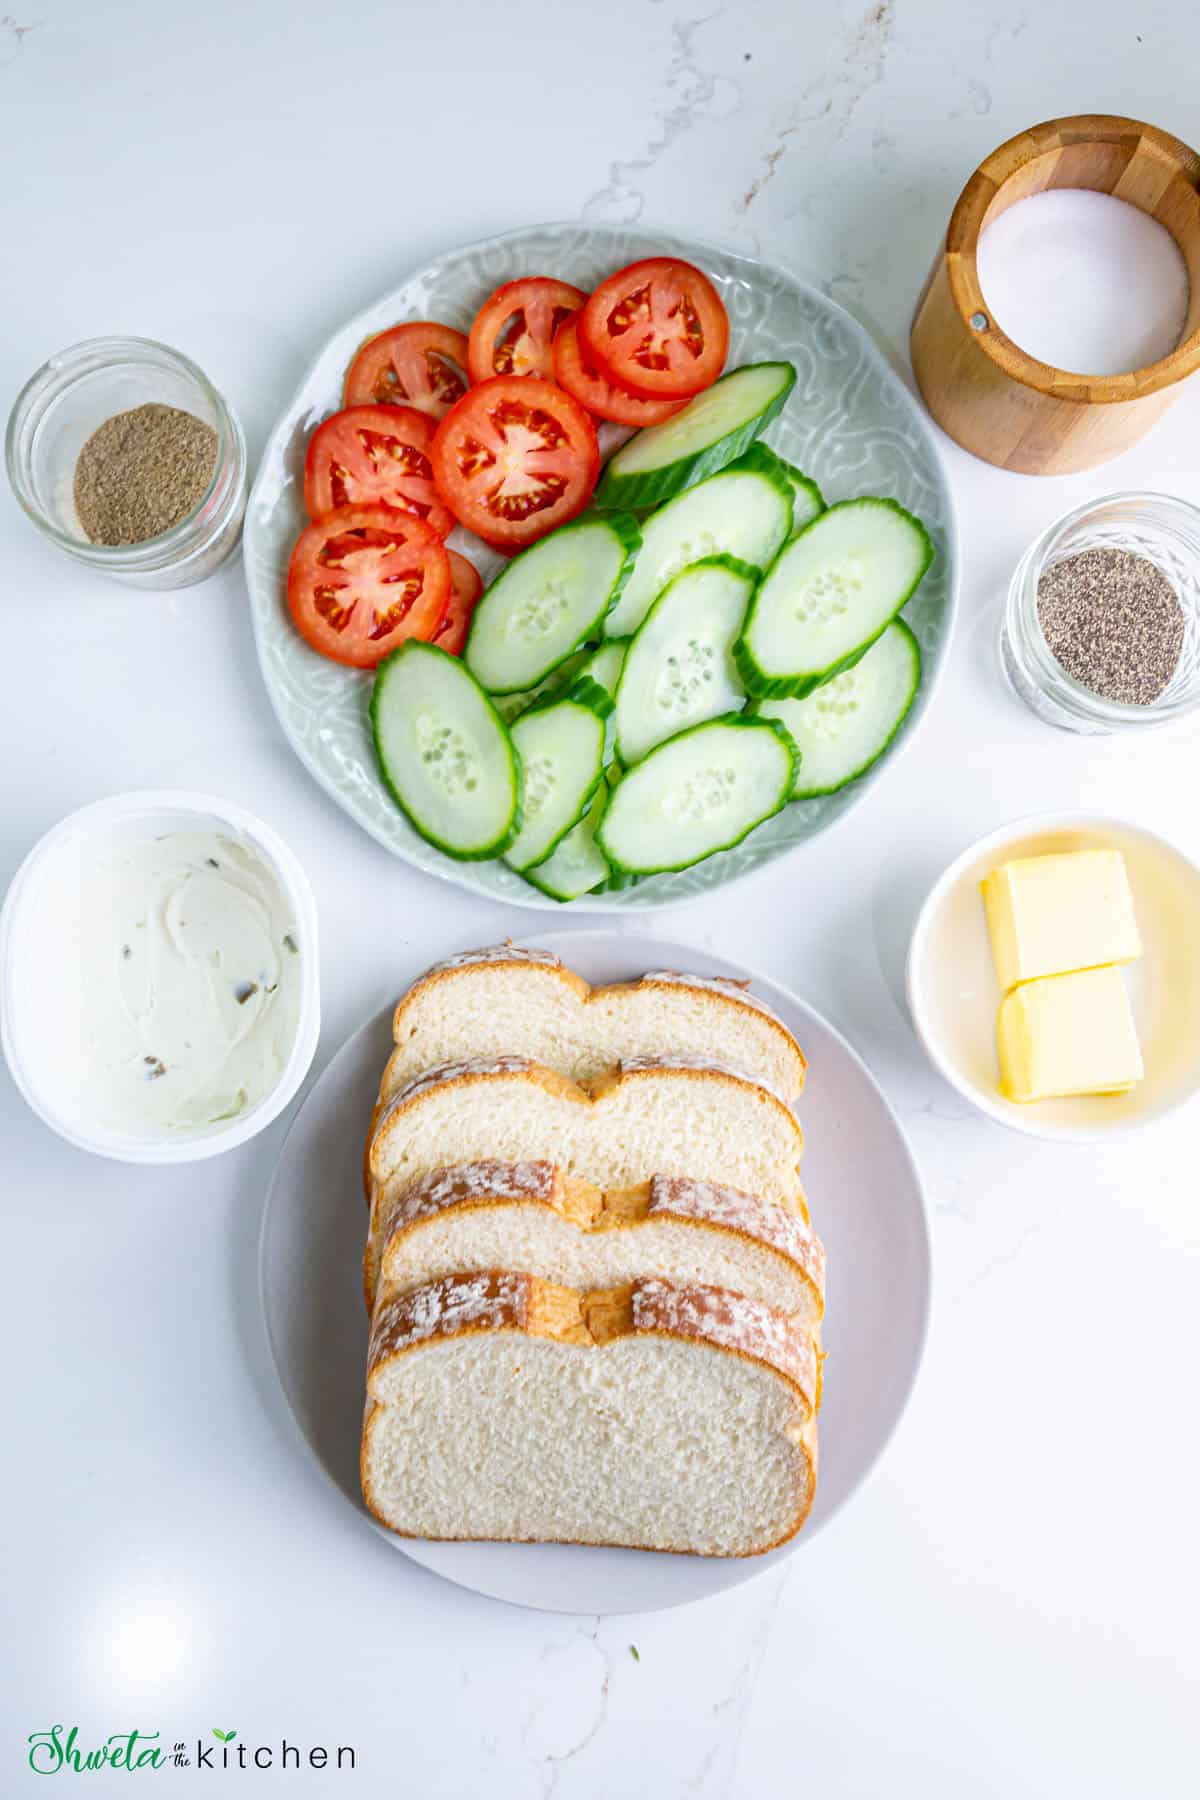 Ingredients for tomato cucumber sandwich placed on white surface